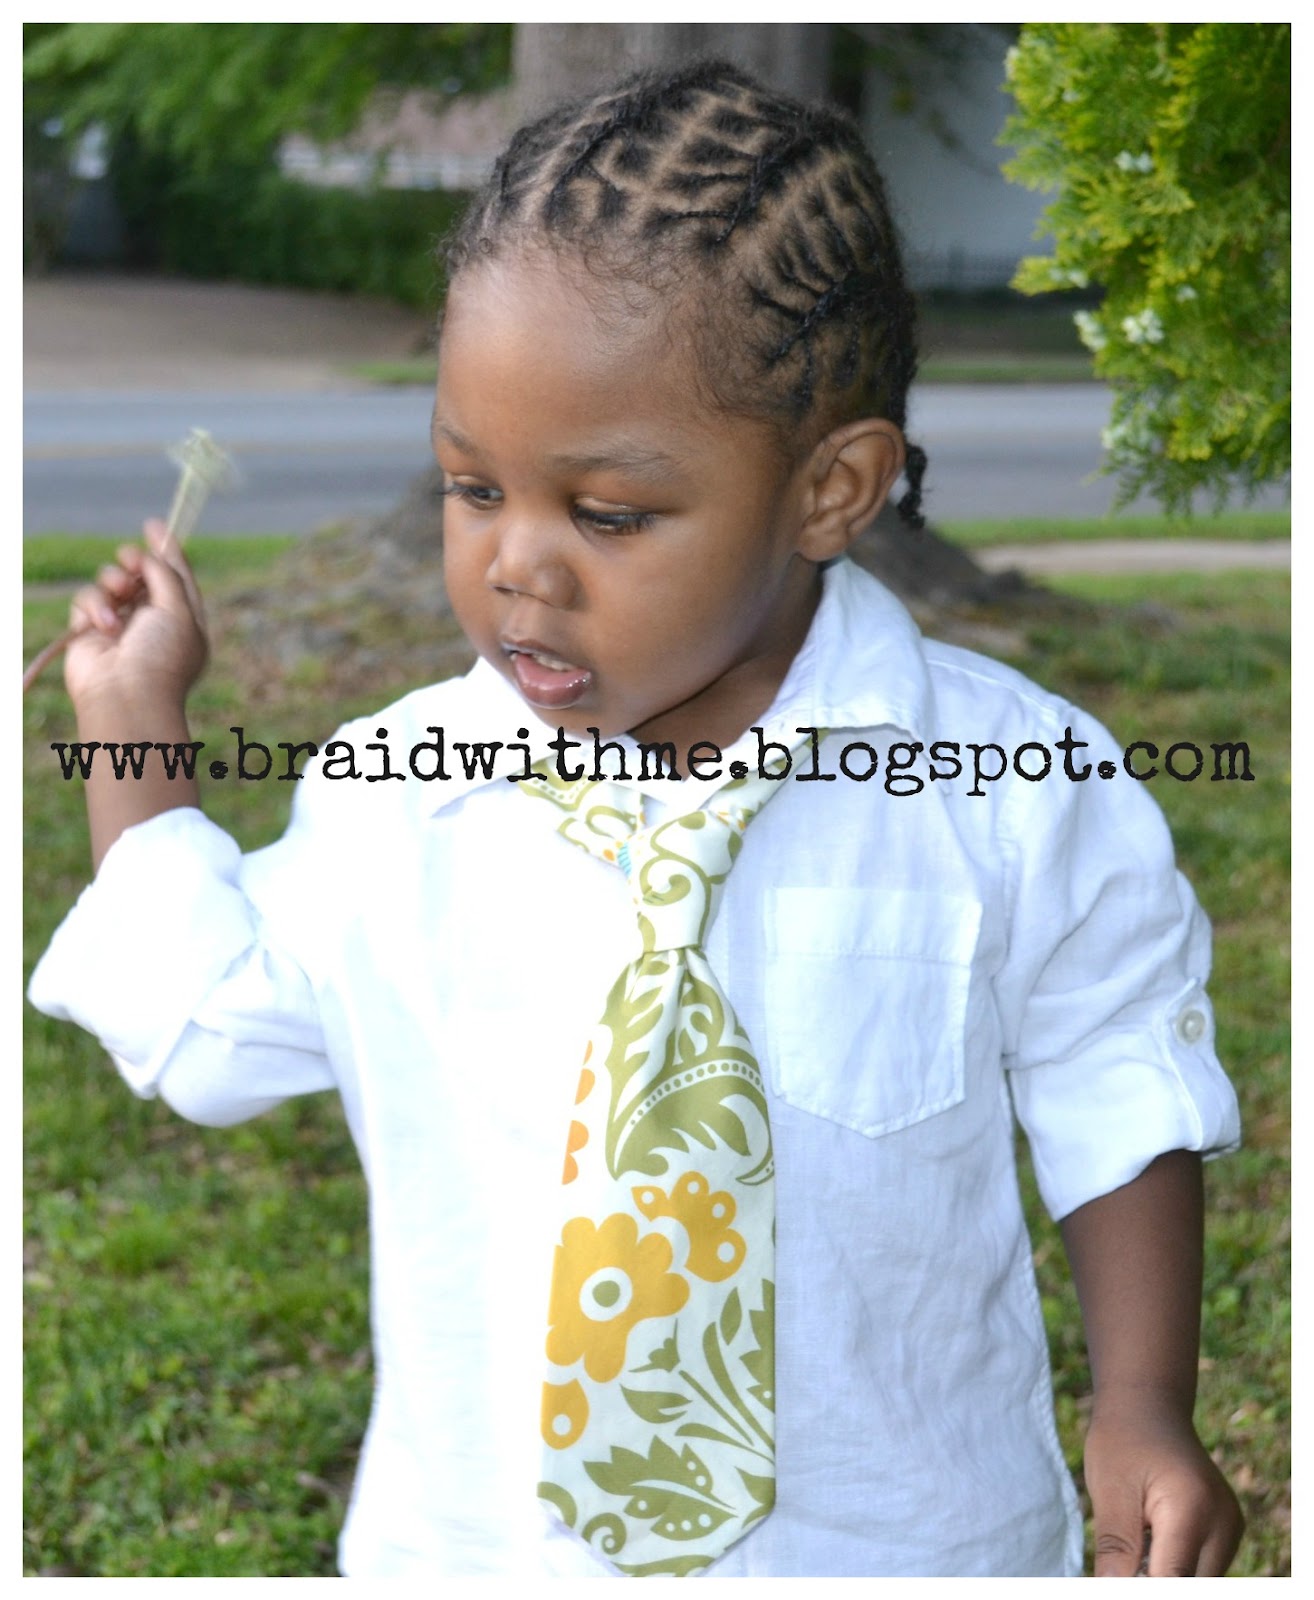 Braided Hairstyles For Black Girls To The Side He also sported this style for Easter without the rubberbands.